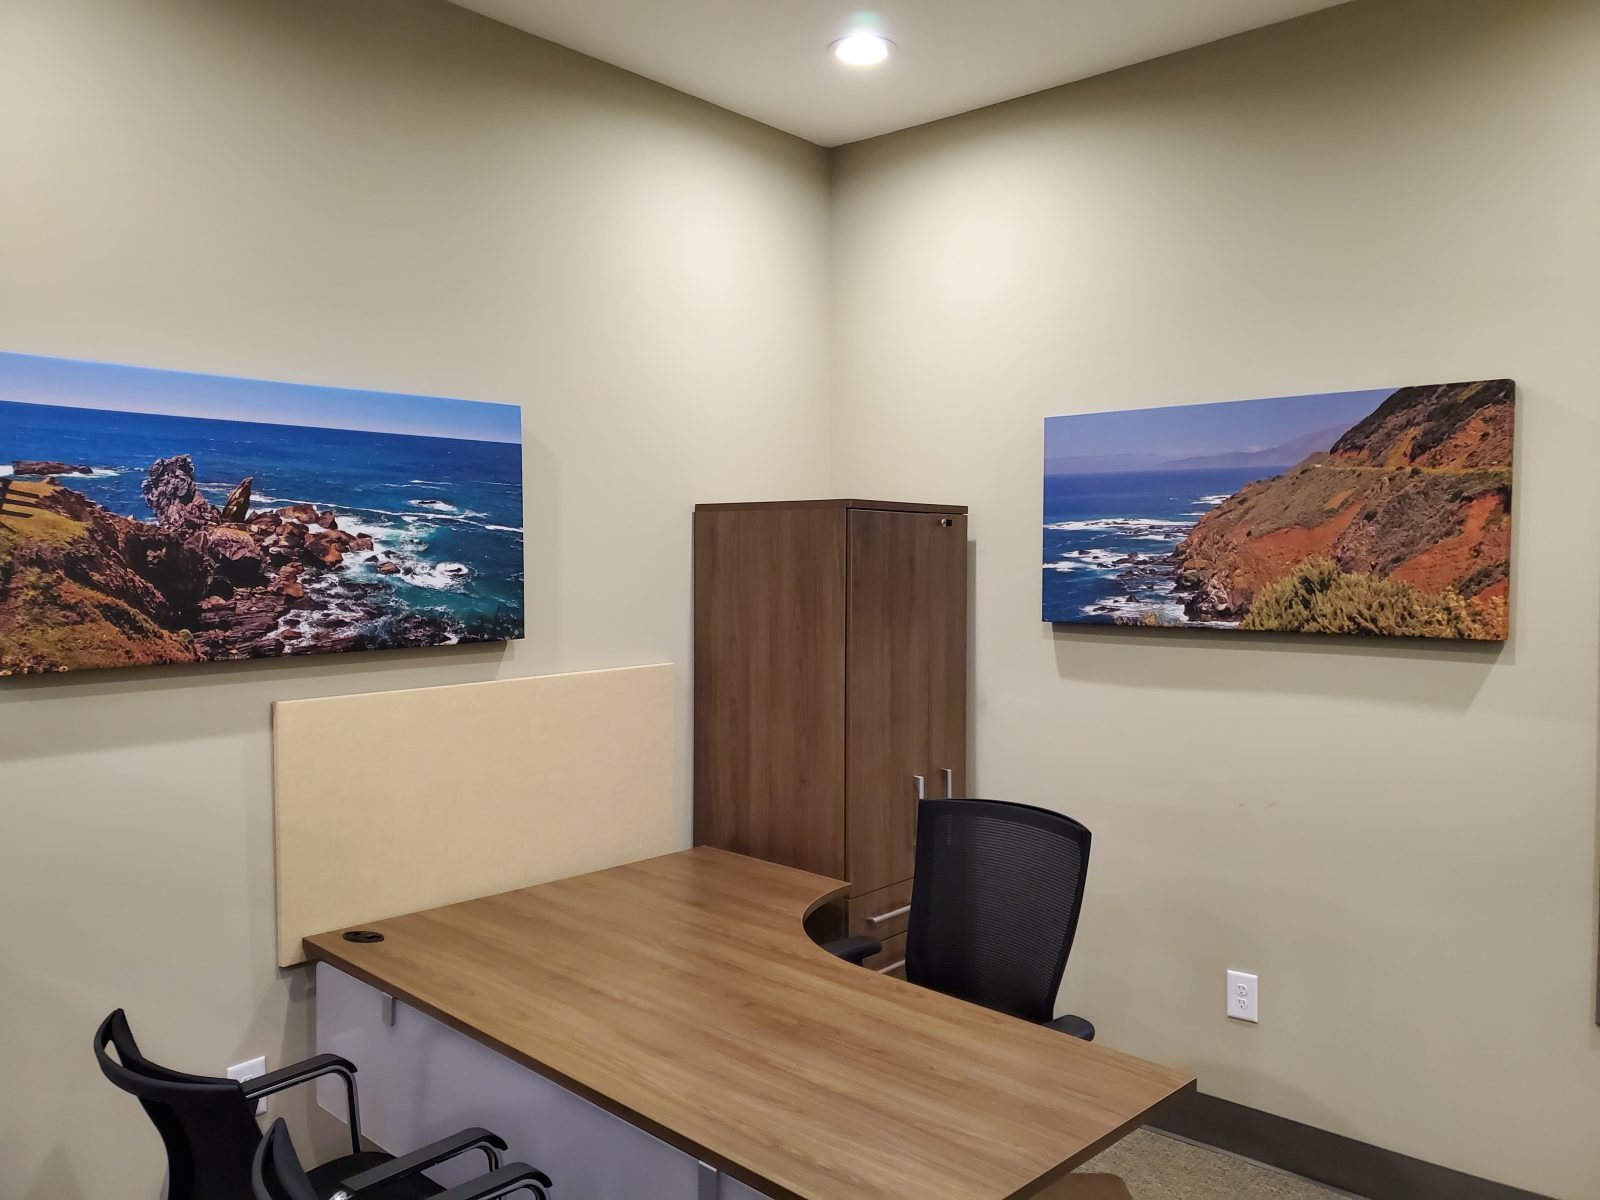 Acoustic Art Panels in office with landscape images of cliffs